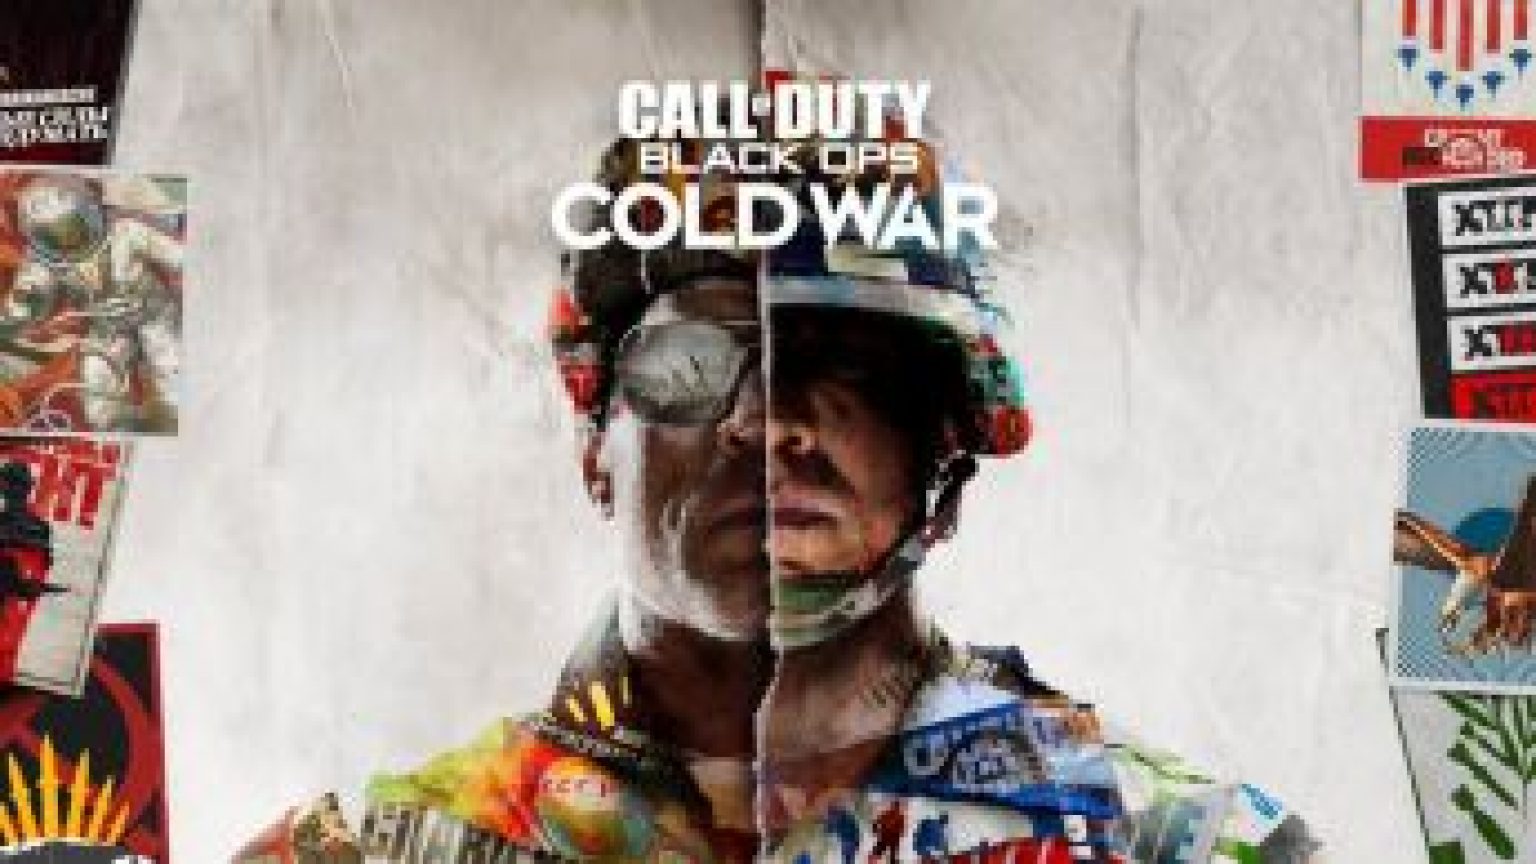 call of duty black ops cold war pc download